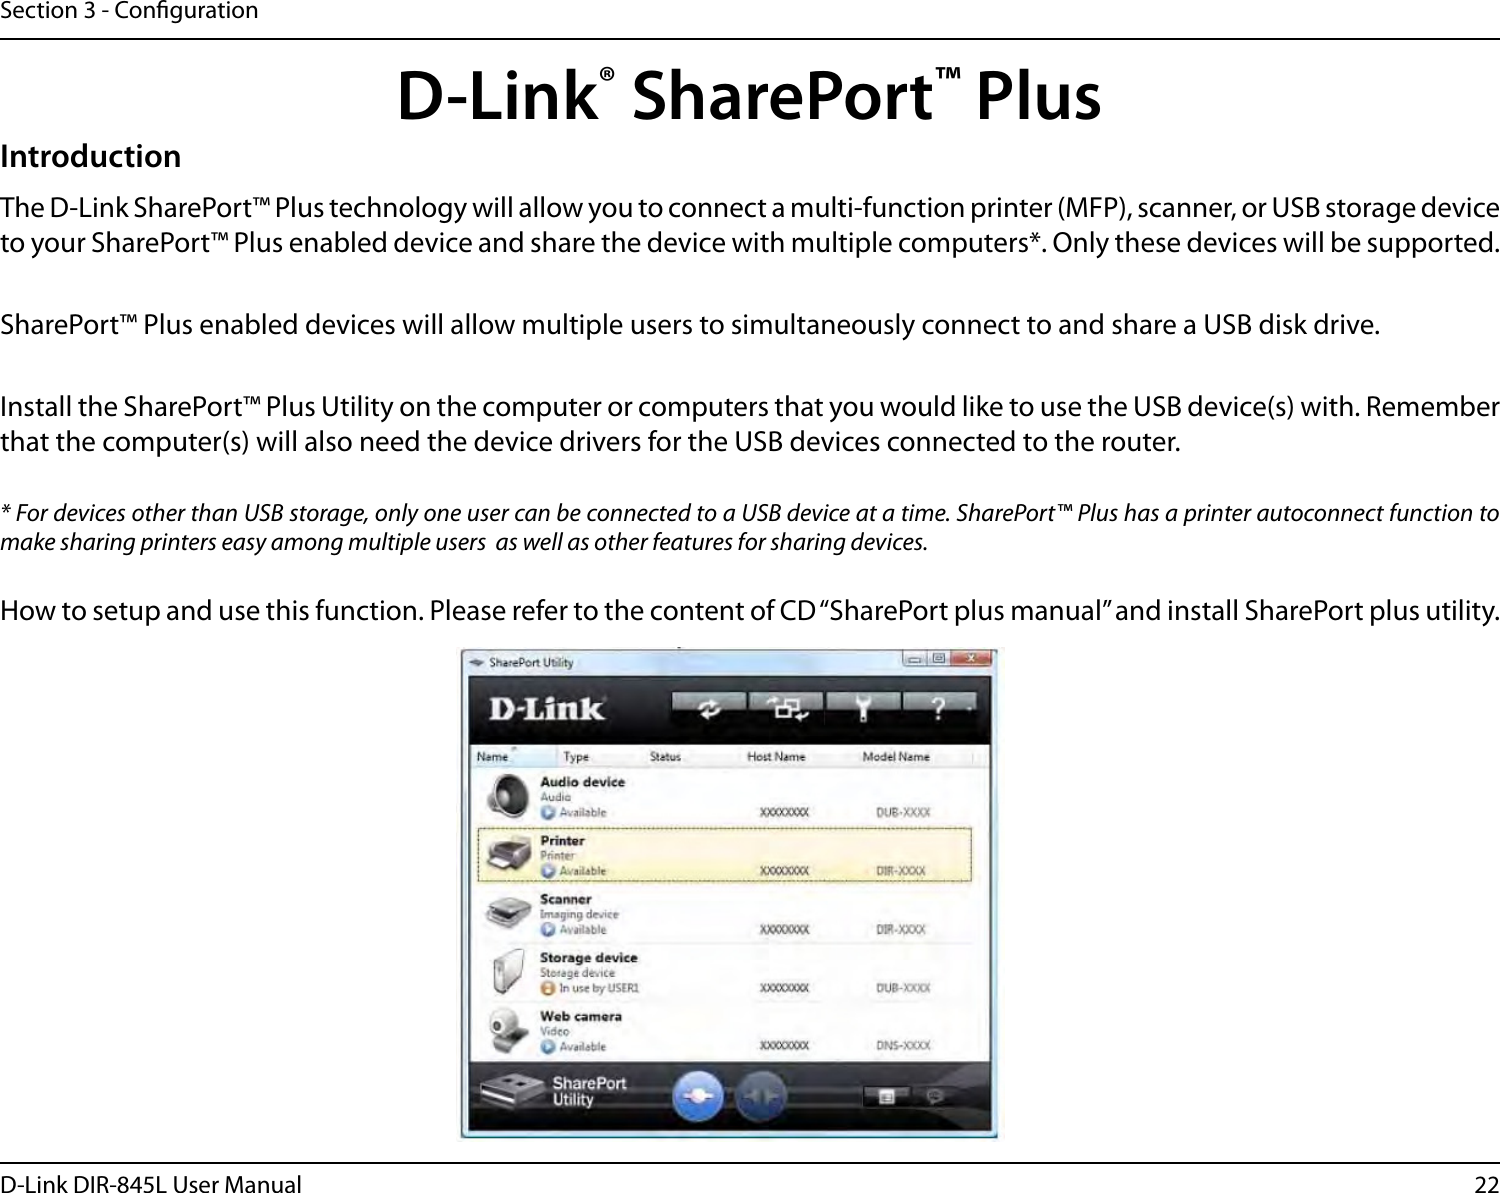 22D-Link DIR-845L User ManualSection 3 - CongurationD-Link® SharePort™ PlusIntroductionThe D-Link SharePort™ Plus technology will allow you to connect a multi-function printer (MFP), scanner, or USB storage device to your SharePort™ Plus enabled device and share the device with multiple computers*. Only these devices will be supported.SharePort™ Plus enabled devices will allow multiple users to simultaneously connect to and share a USB disk drive. Install the SharePort™ Plus Utility on the computer or computers that you would like to use the USB device(s) with. Remember that the computer(s) will also need the device drivers for the USB devices connected to the router.* For devices other than USB storage, only one user can be connected to a USB device at a time. SharePort™ Plus has a printer autoconnect function to make sharing printers easy among multiple users  as well as other features for sharing devices.How to setup and use this function. Please refer to the content of CD “SharePort plus manual” and install SharePort plus utility.